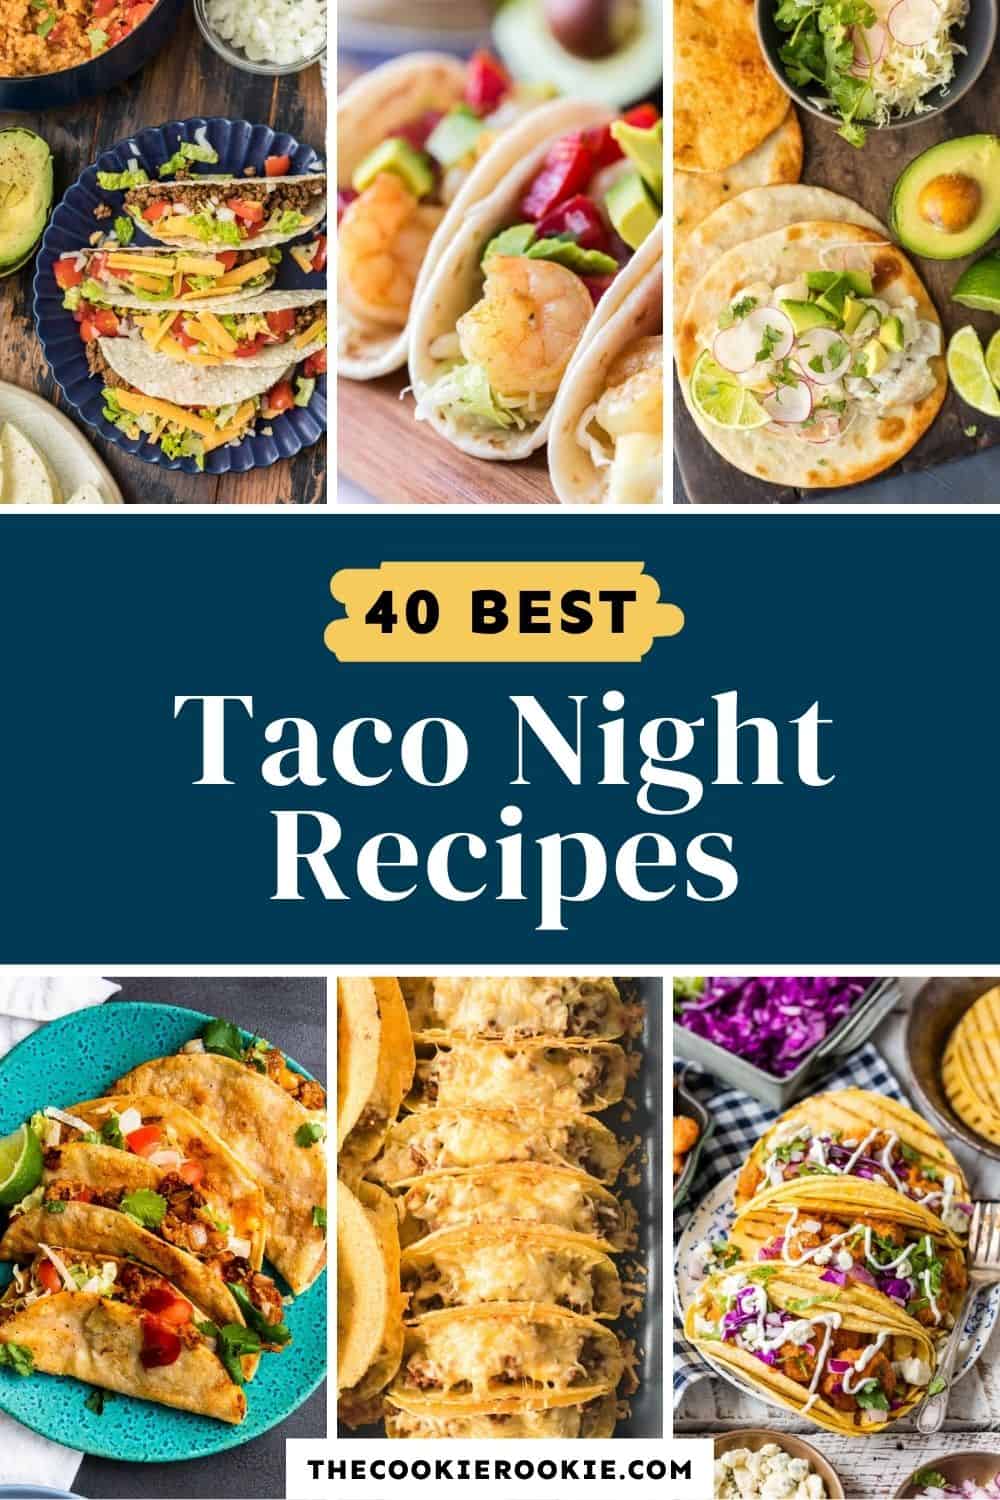 65 Mexican Recipes - Traditional Mexican Food